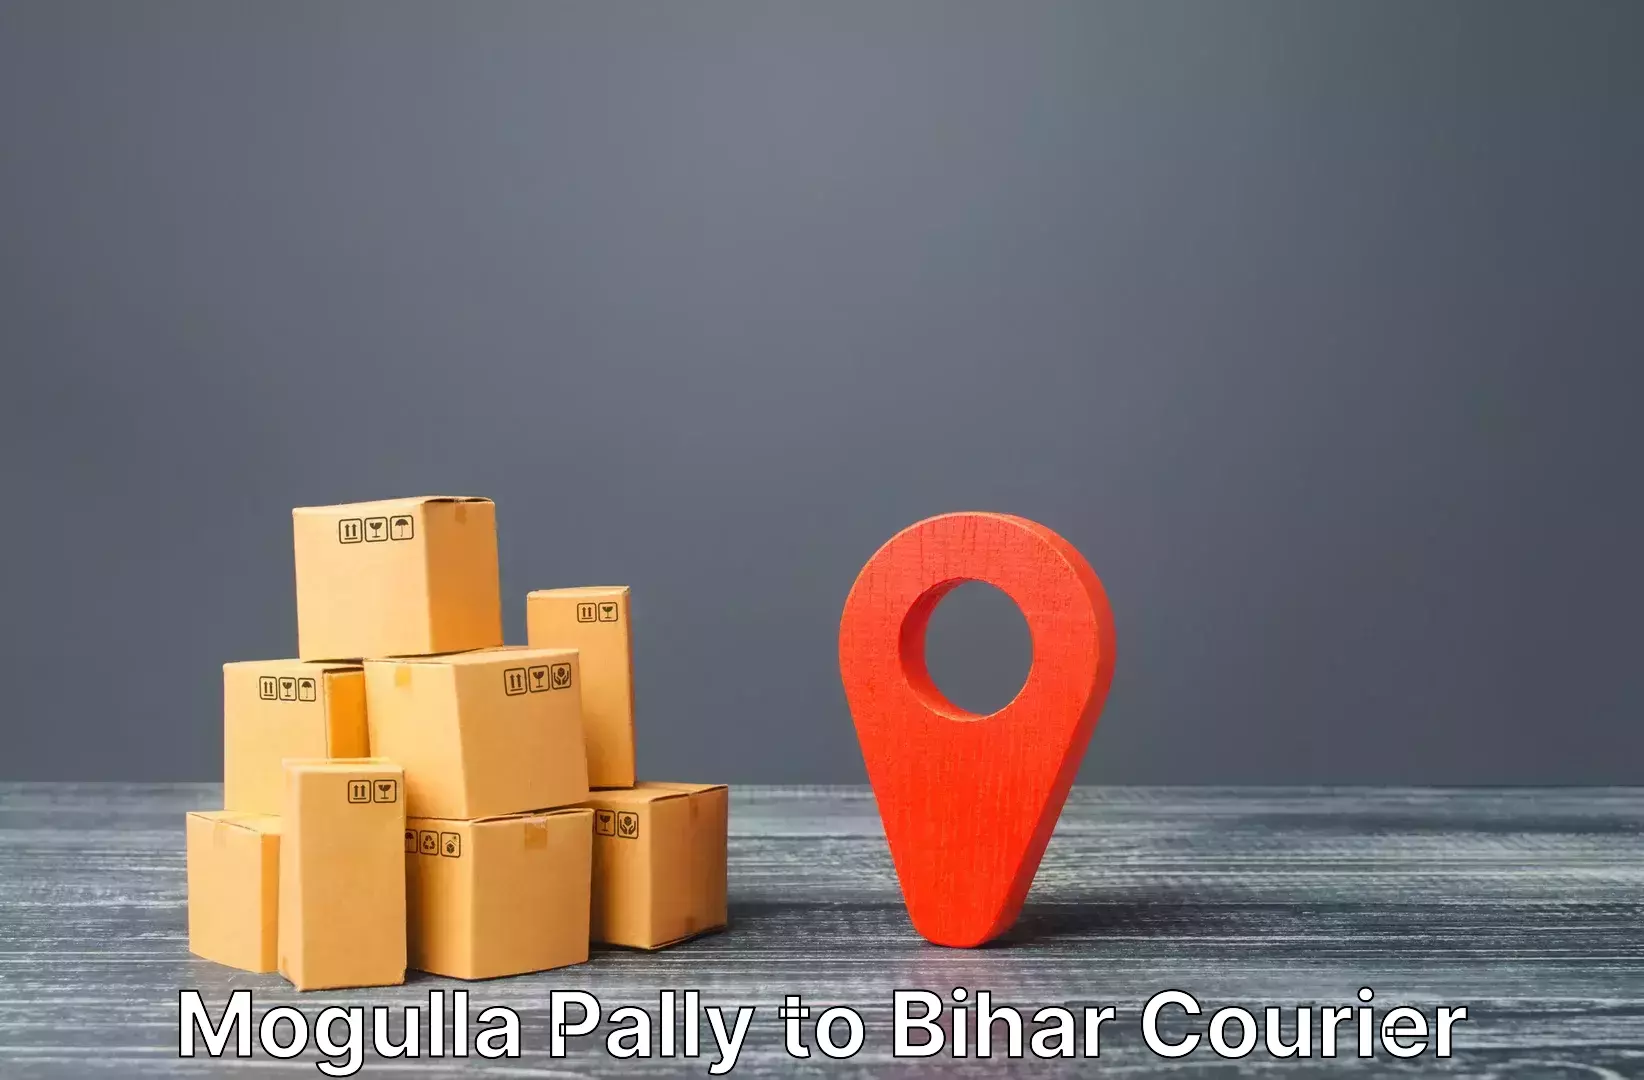 Luggage delivery network Mogulla Pally to Kochas